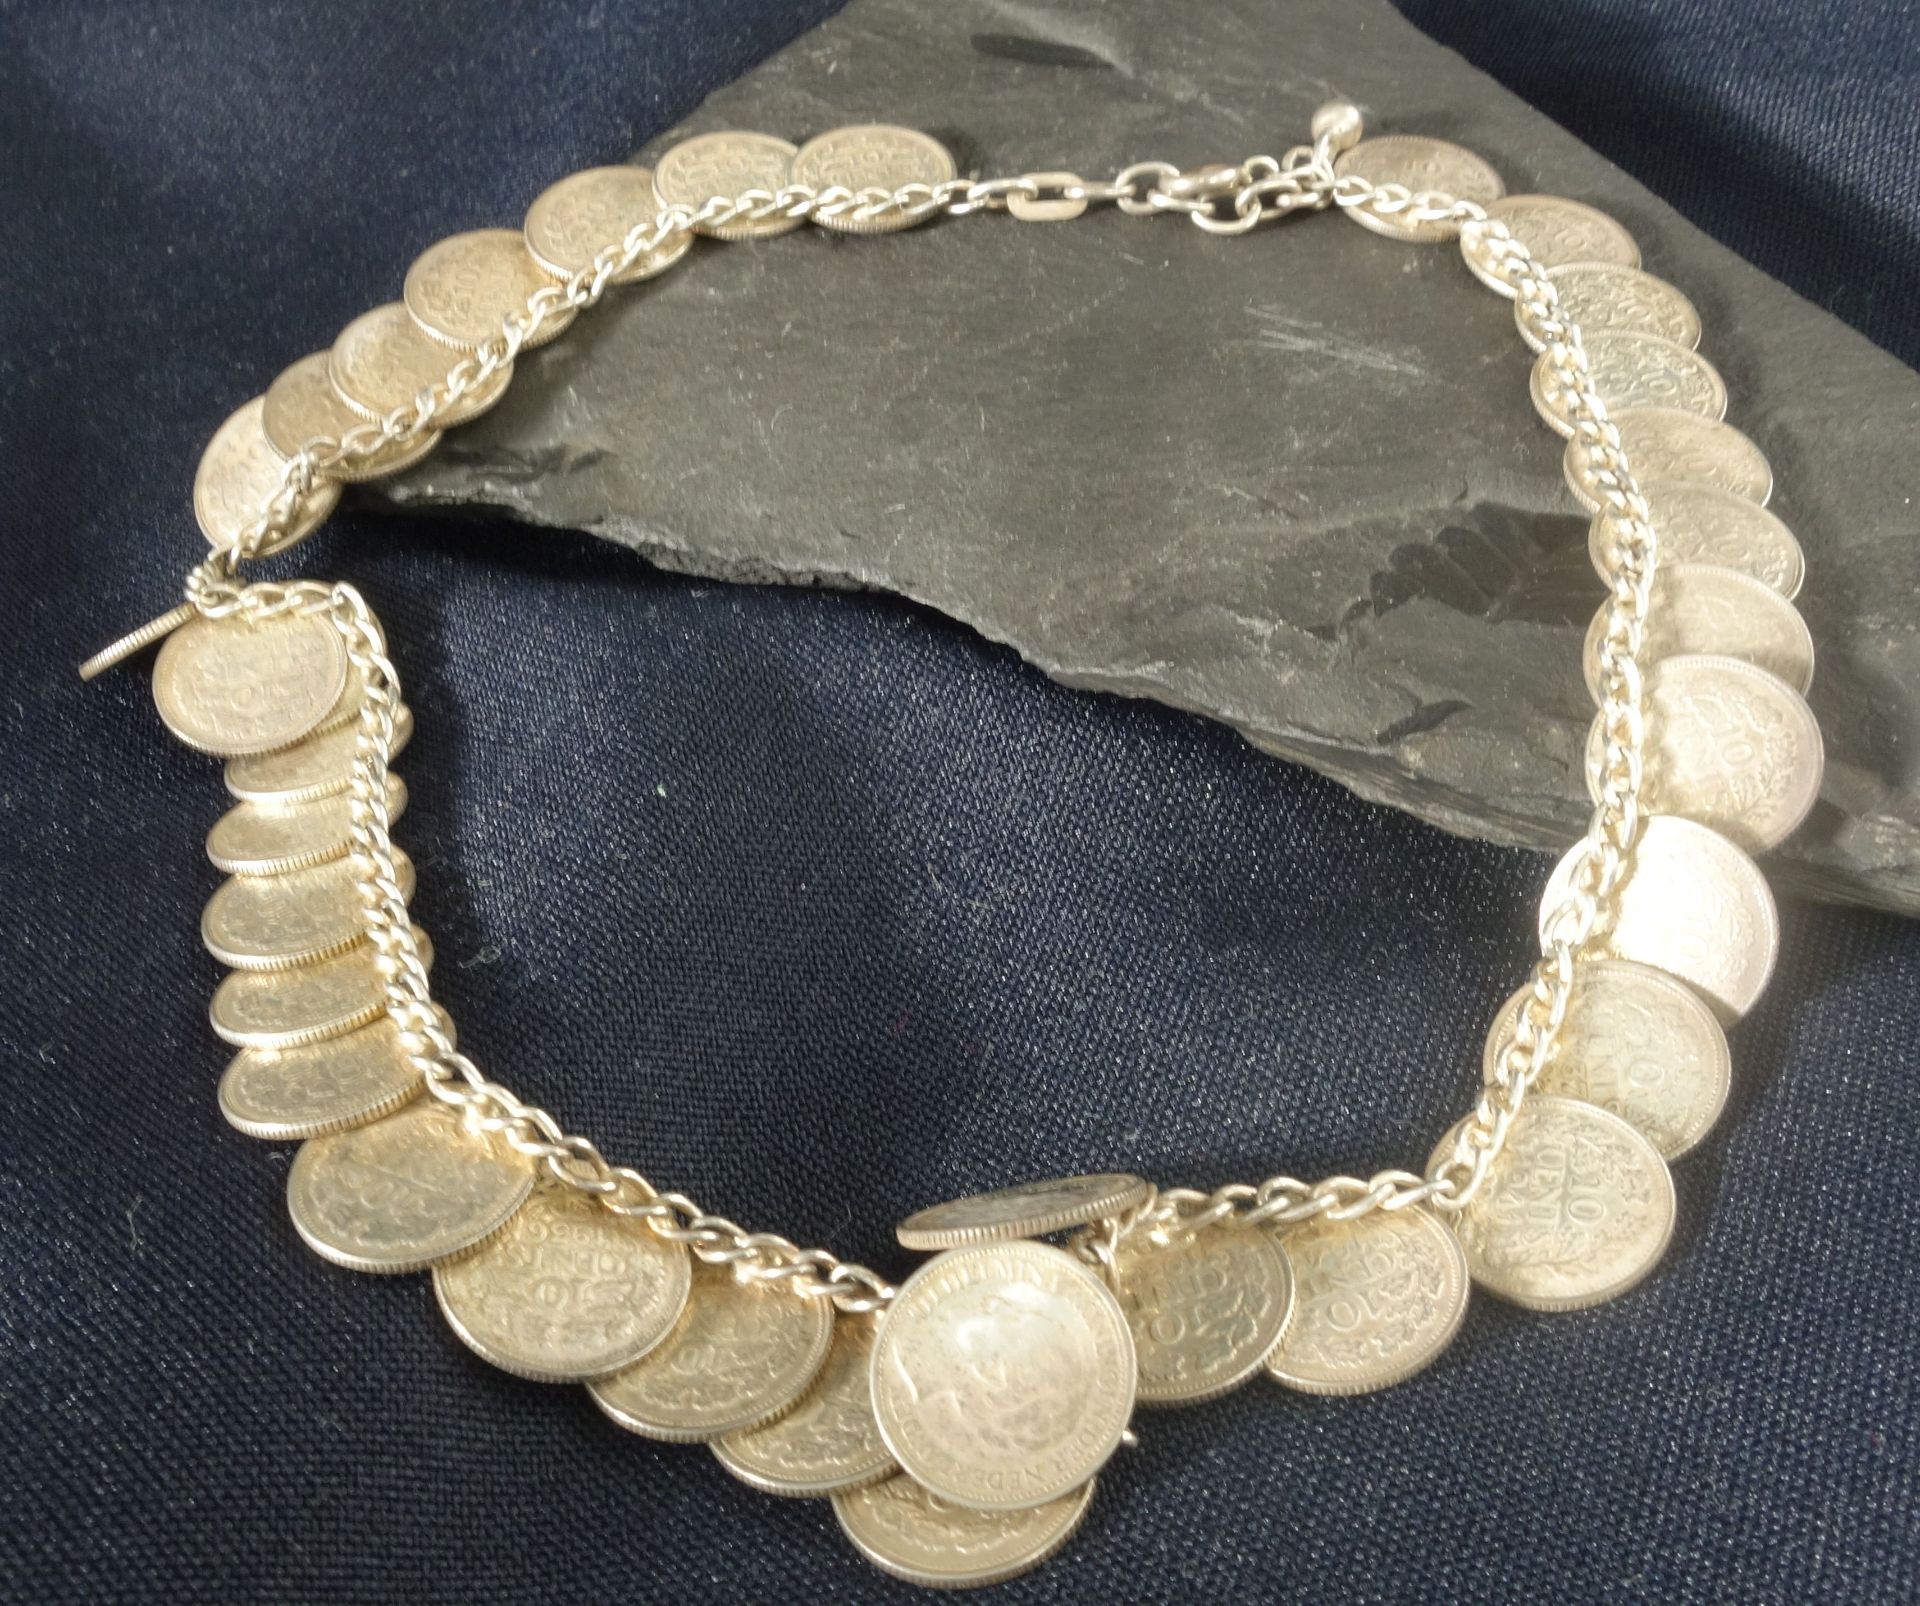 JEWELLERY SET: COIN BRACELET AND COIN NECKLACE - Image 6 of 6